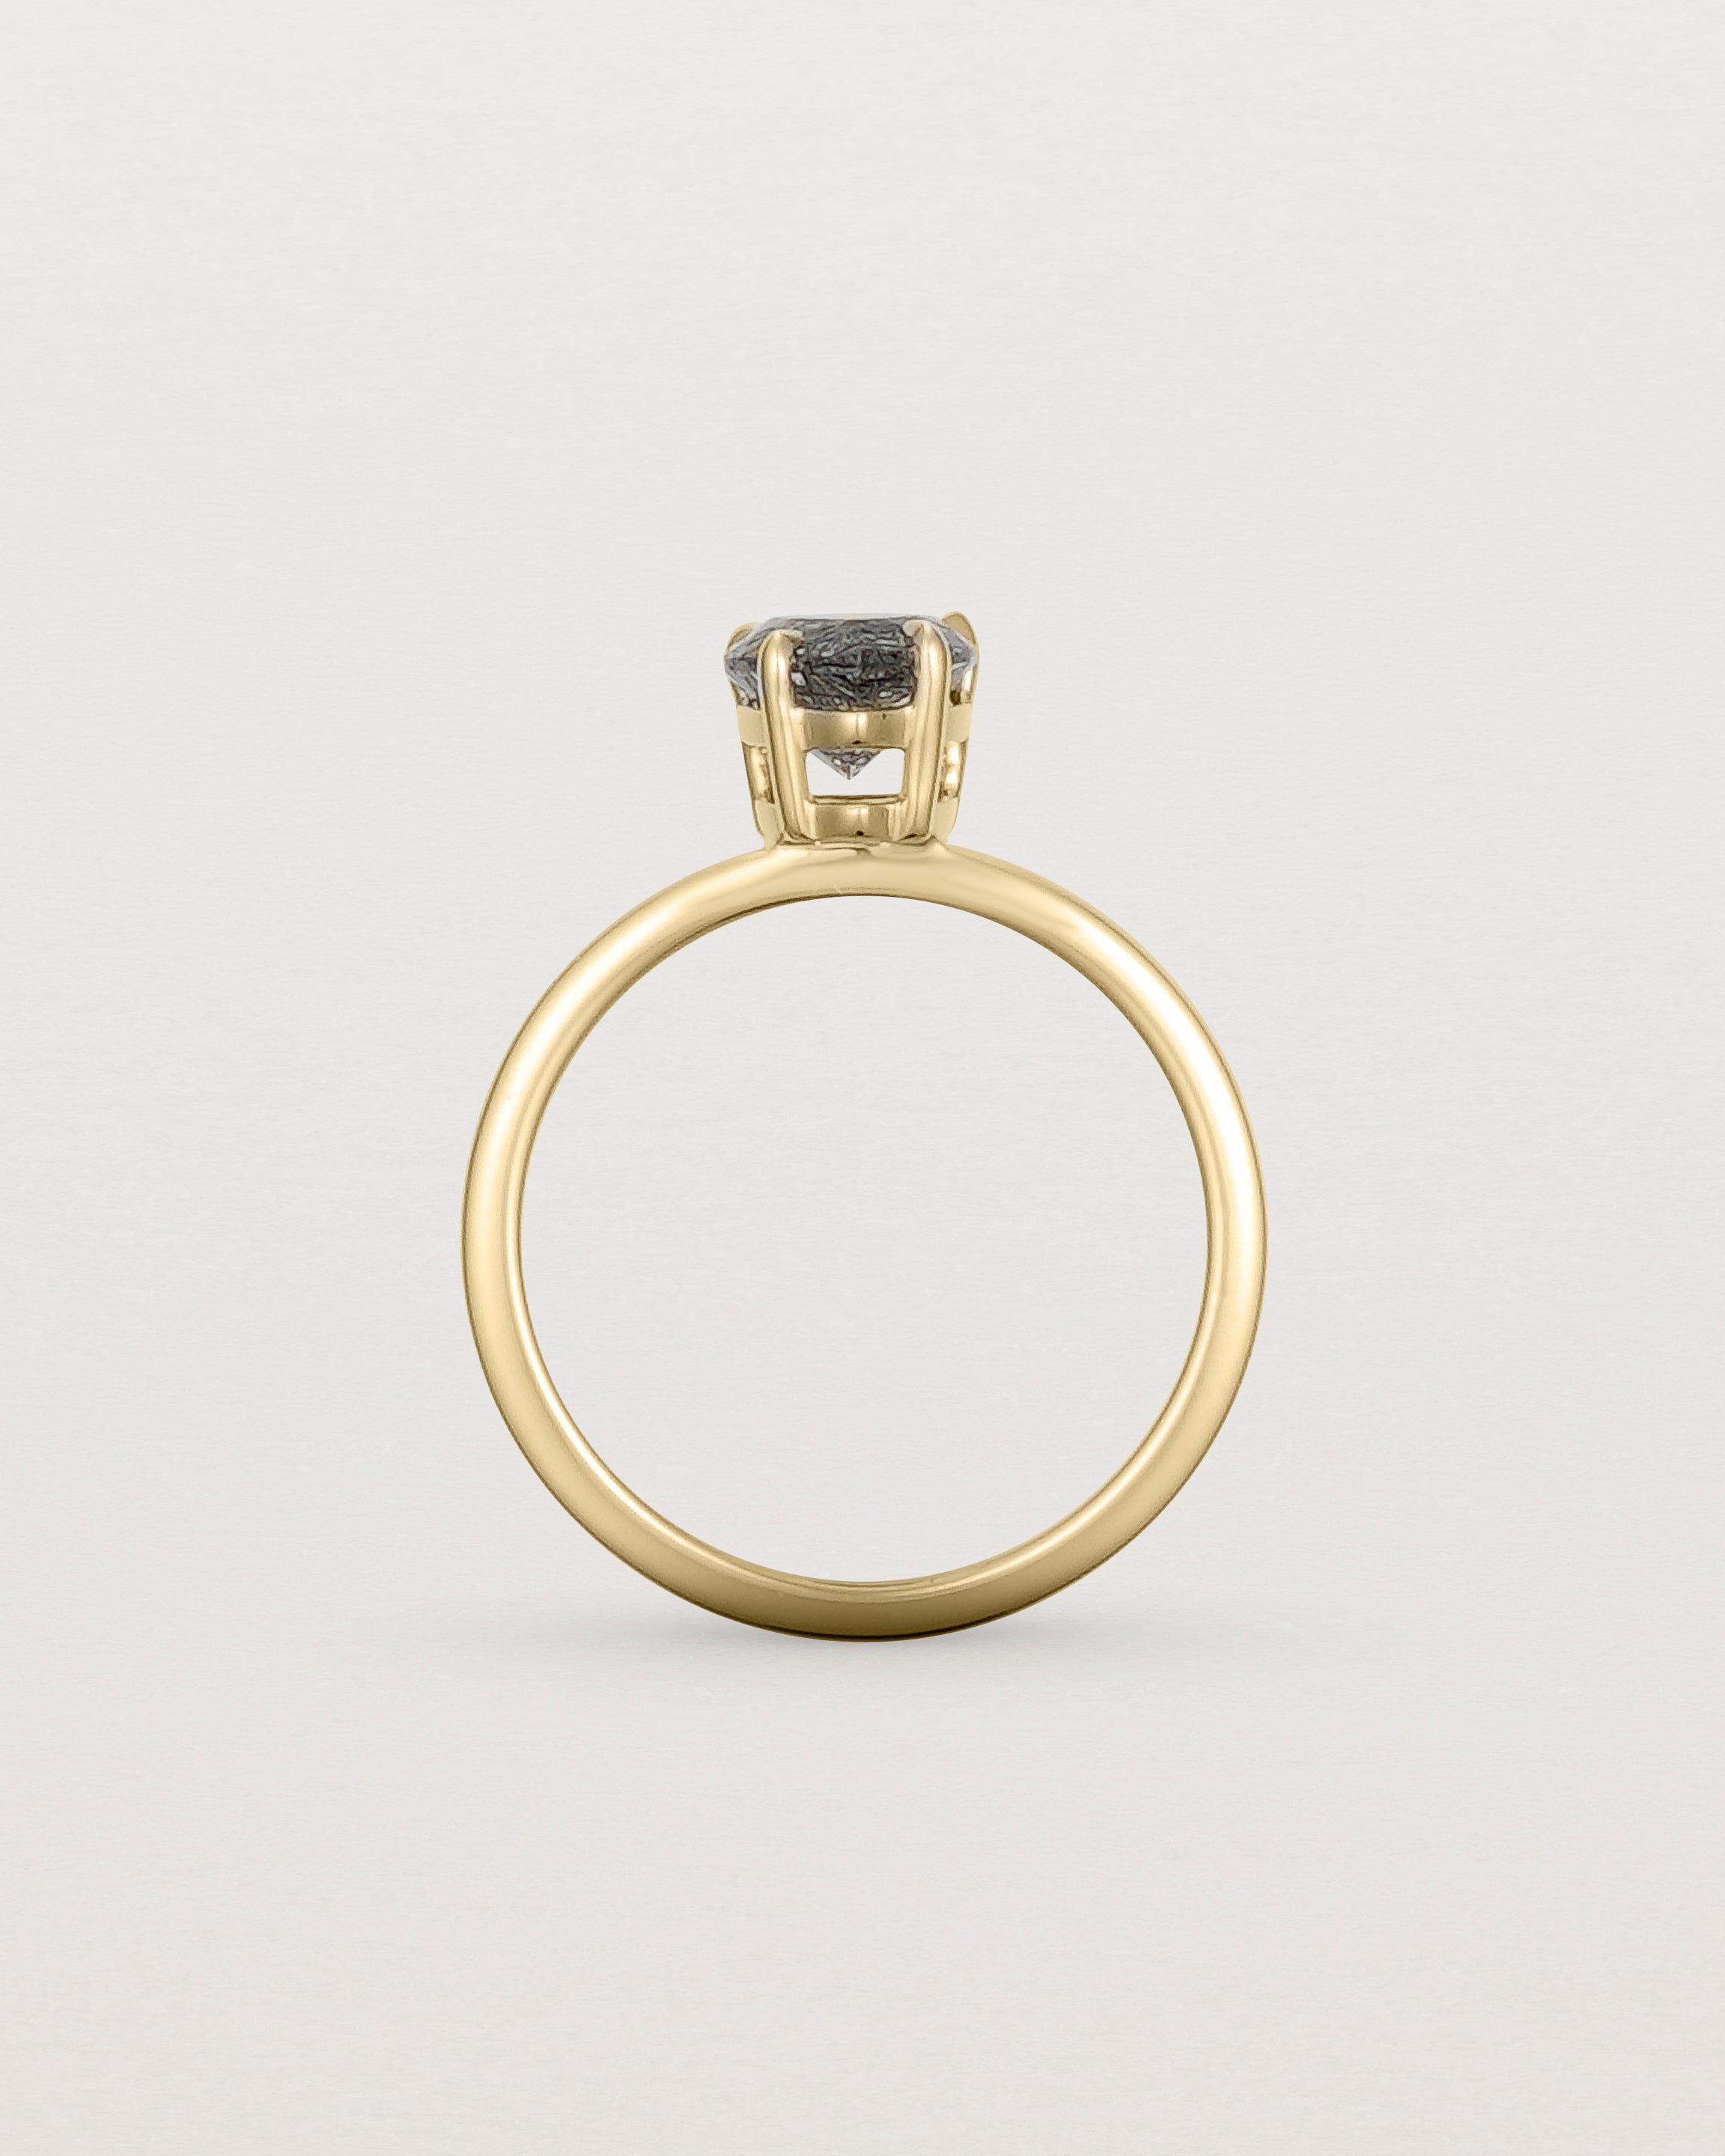 Standing view of the Una Pear Solitaire | Tourmalinated Quartz | Yellow Gold.